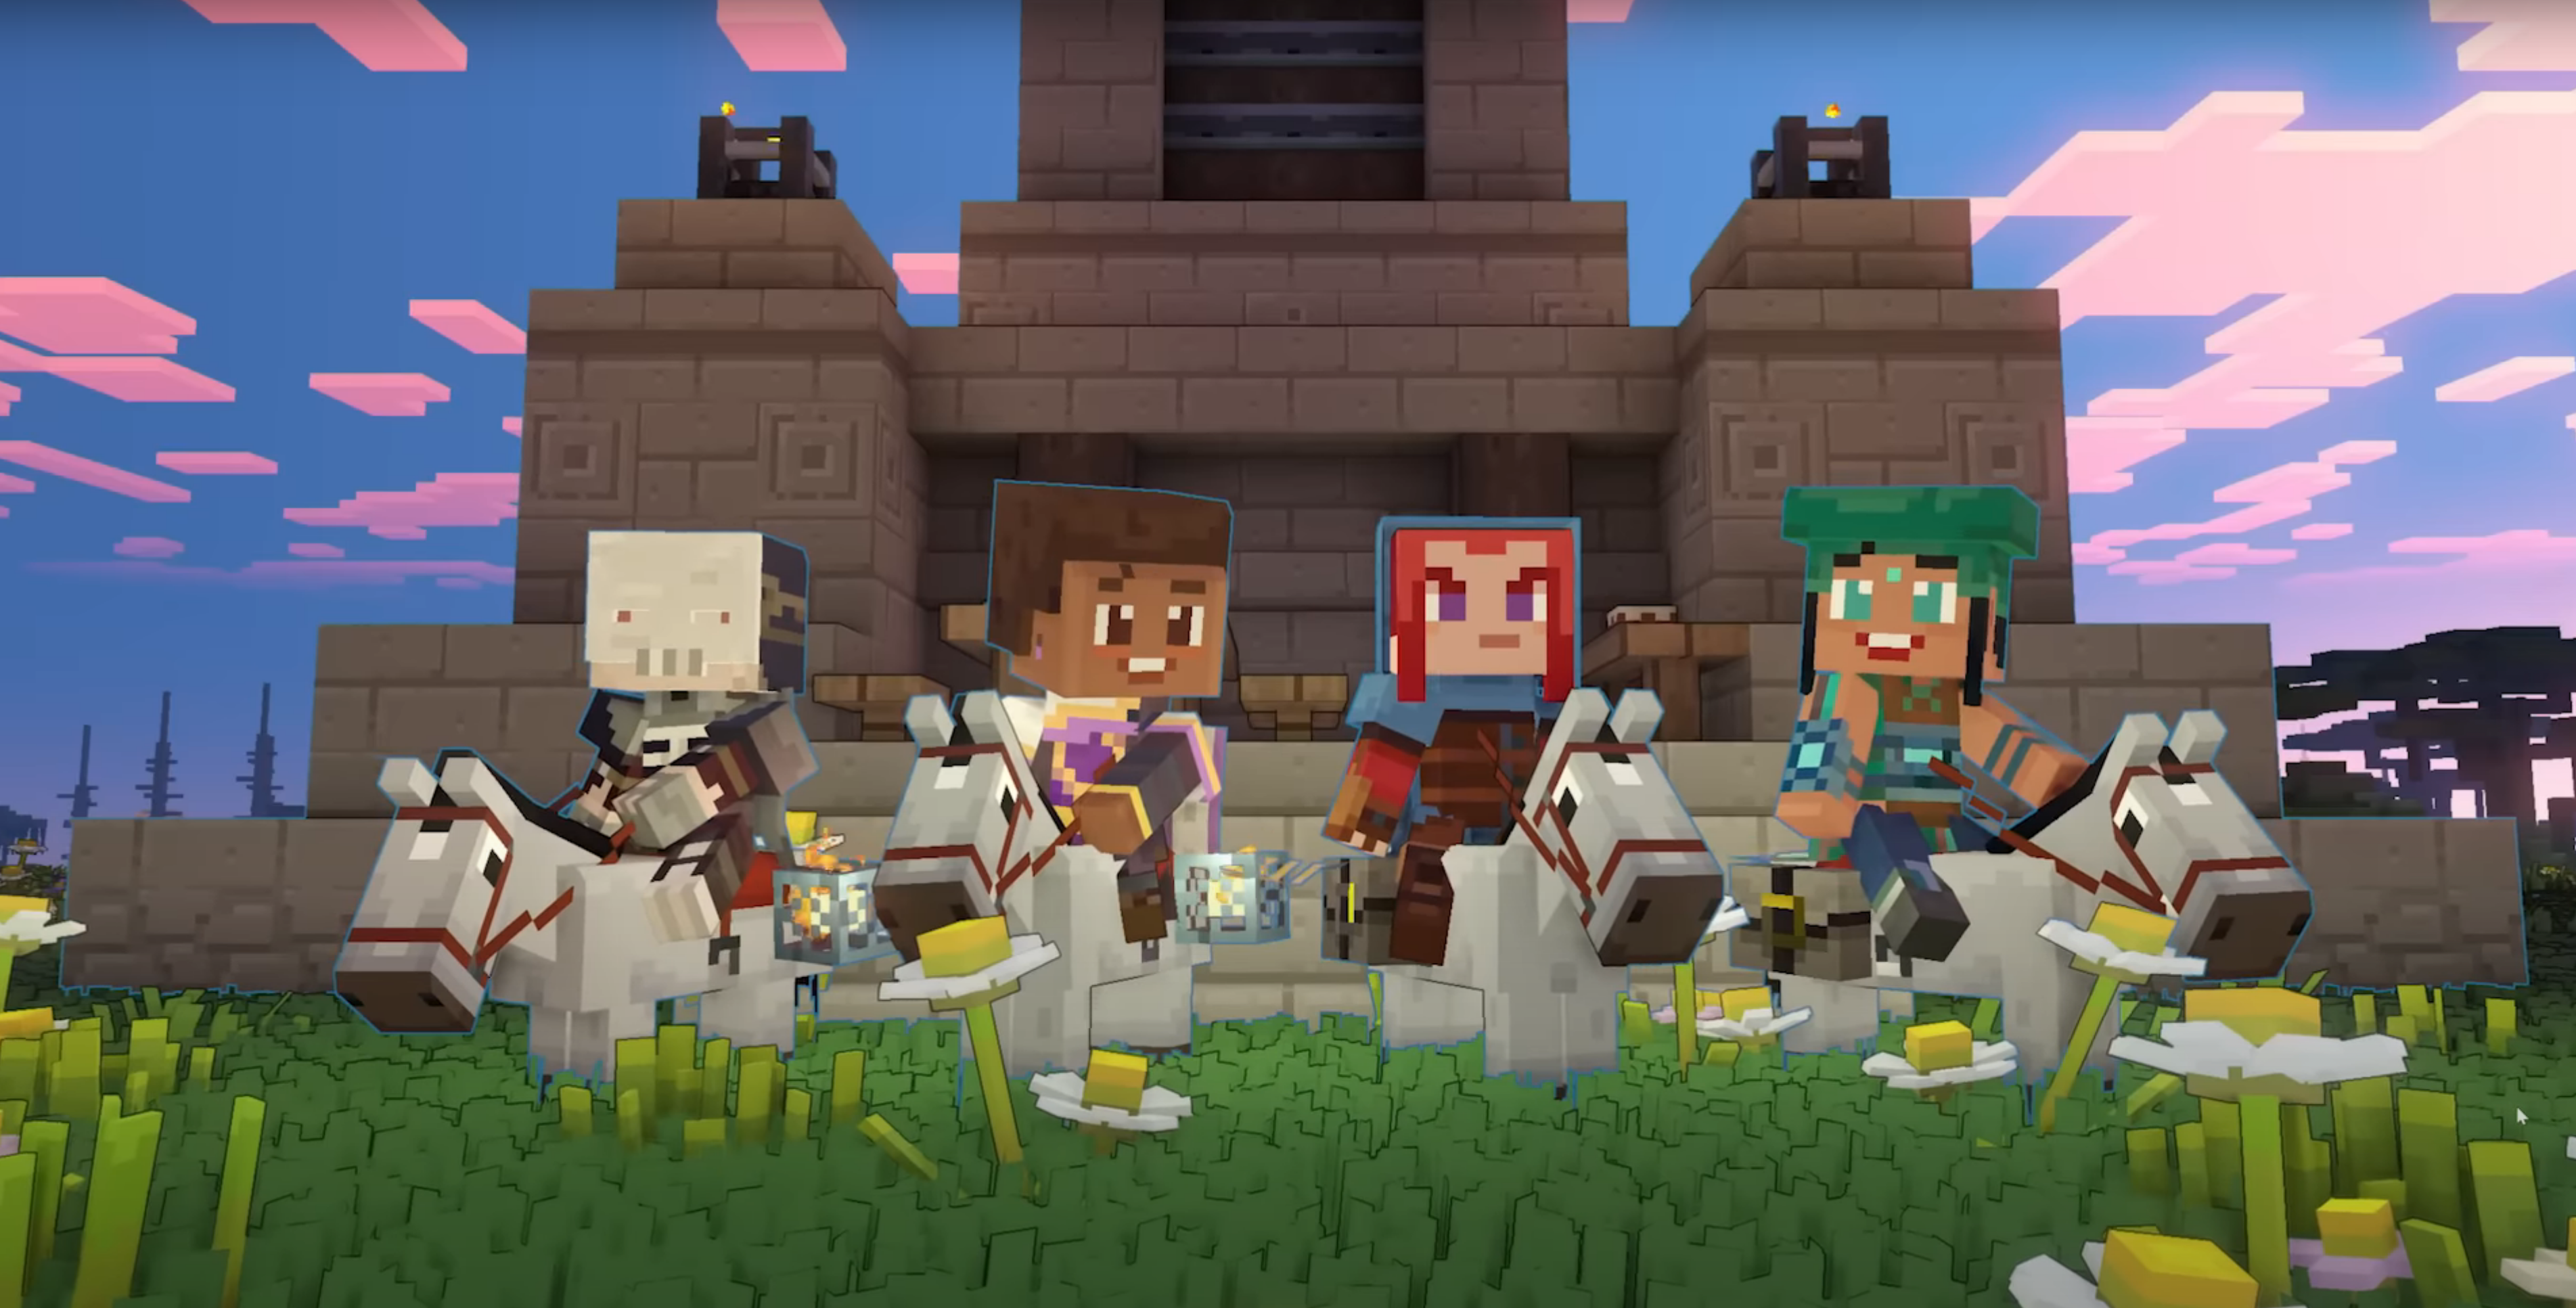 Minecraft Legends characters, in the game’s multiplayer mode, face the camera while riding various mounts